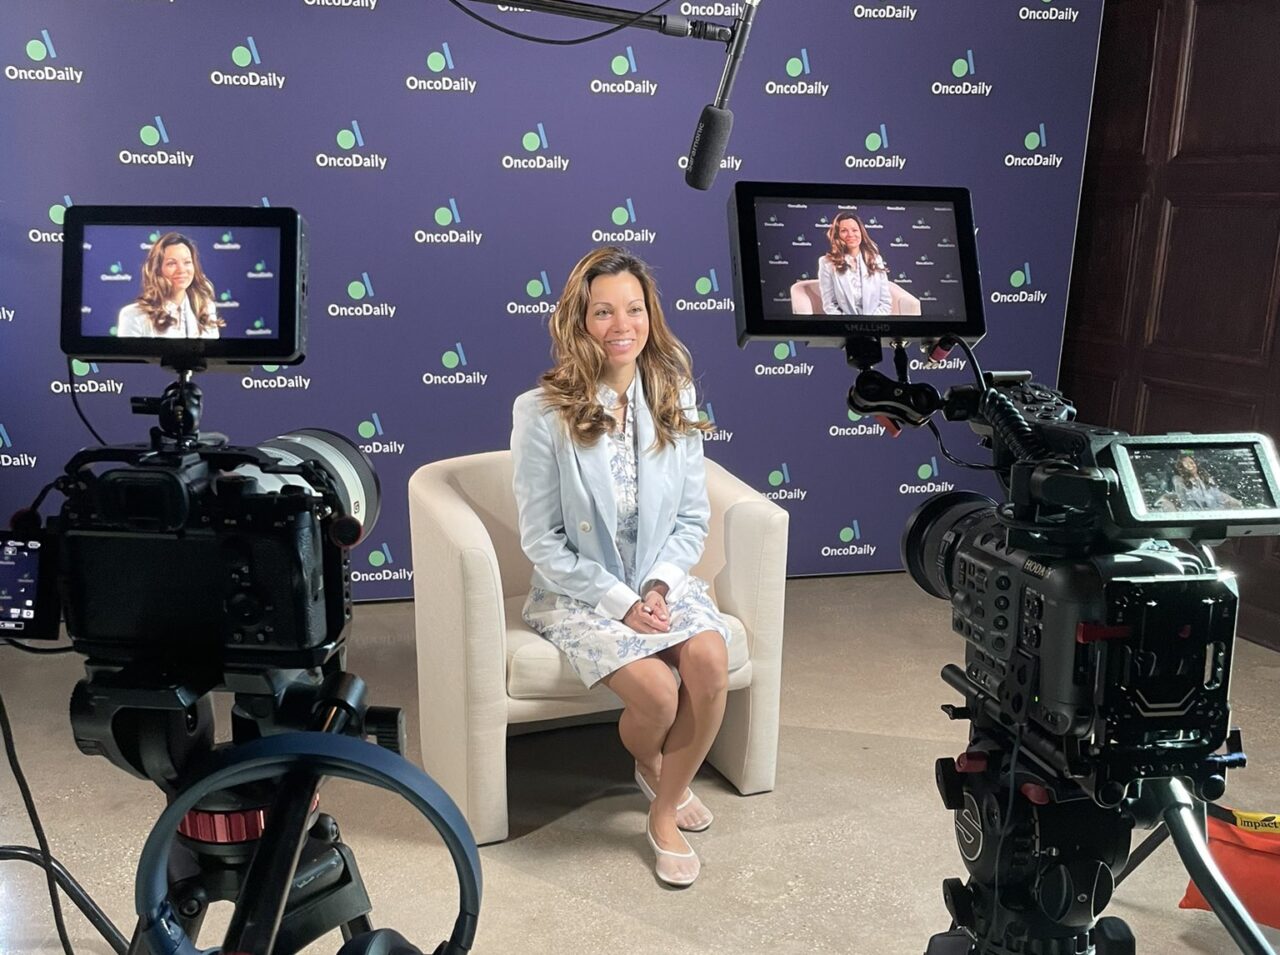 Isabel Preeshagul: Early bird interview at Oncodaily sharing our work